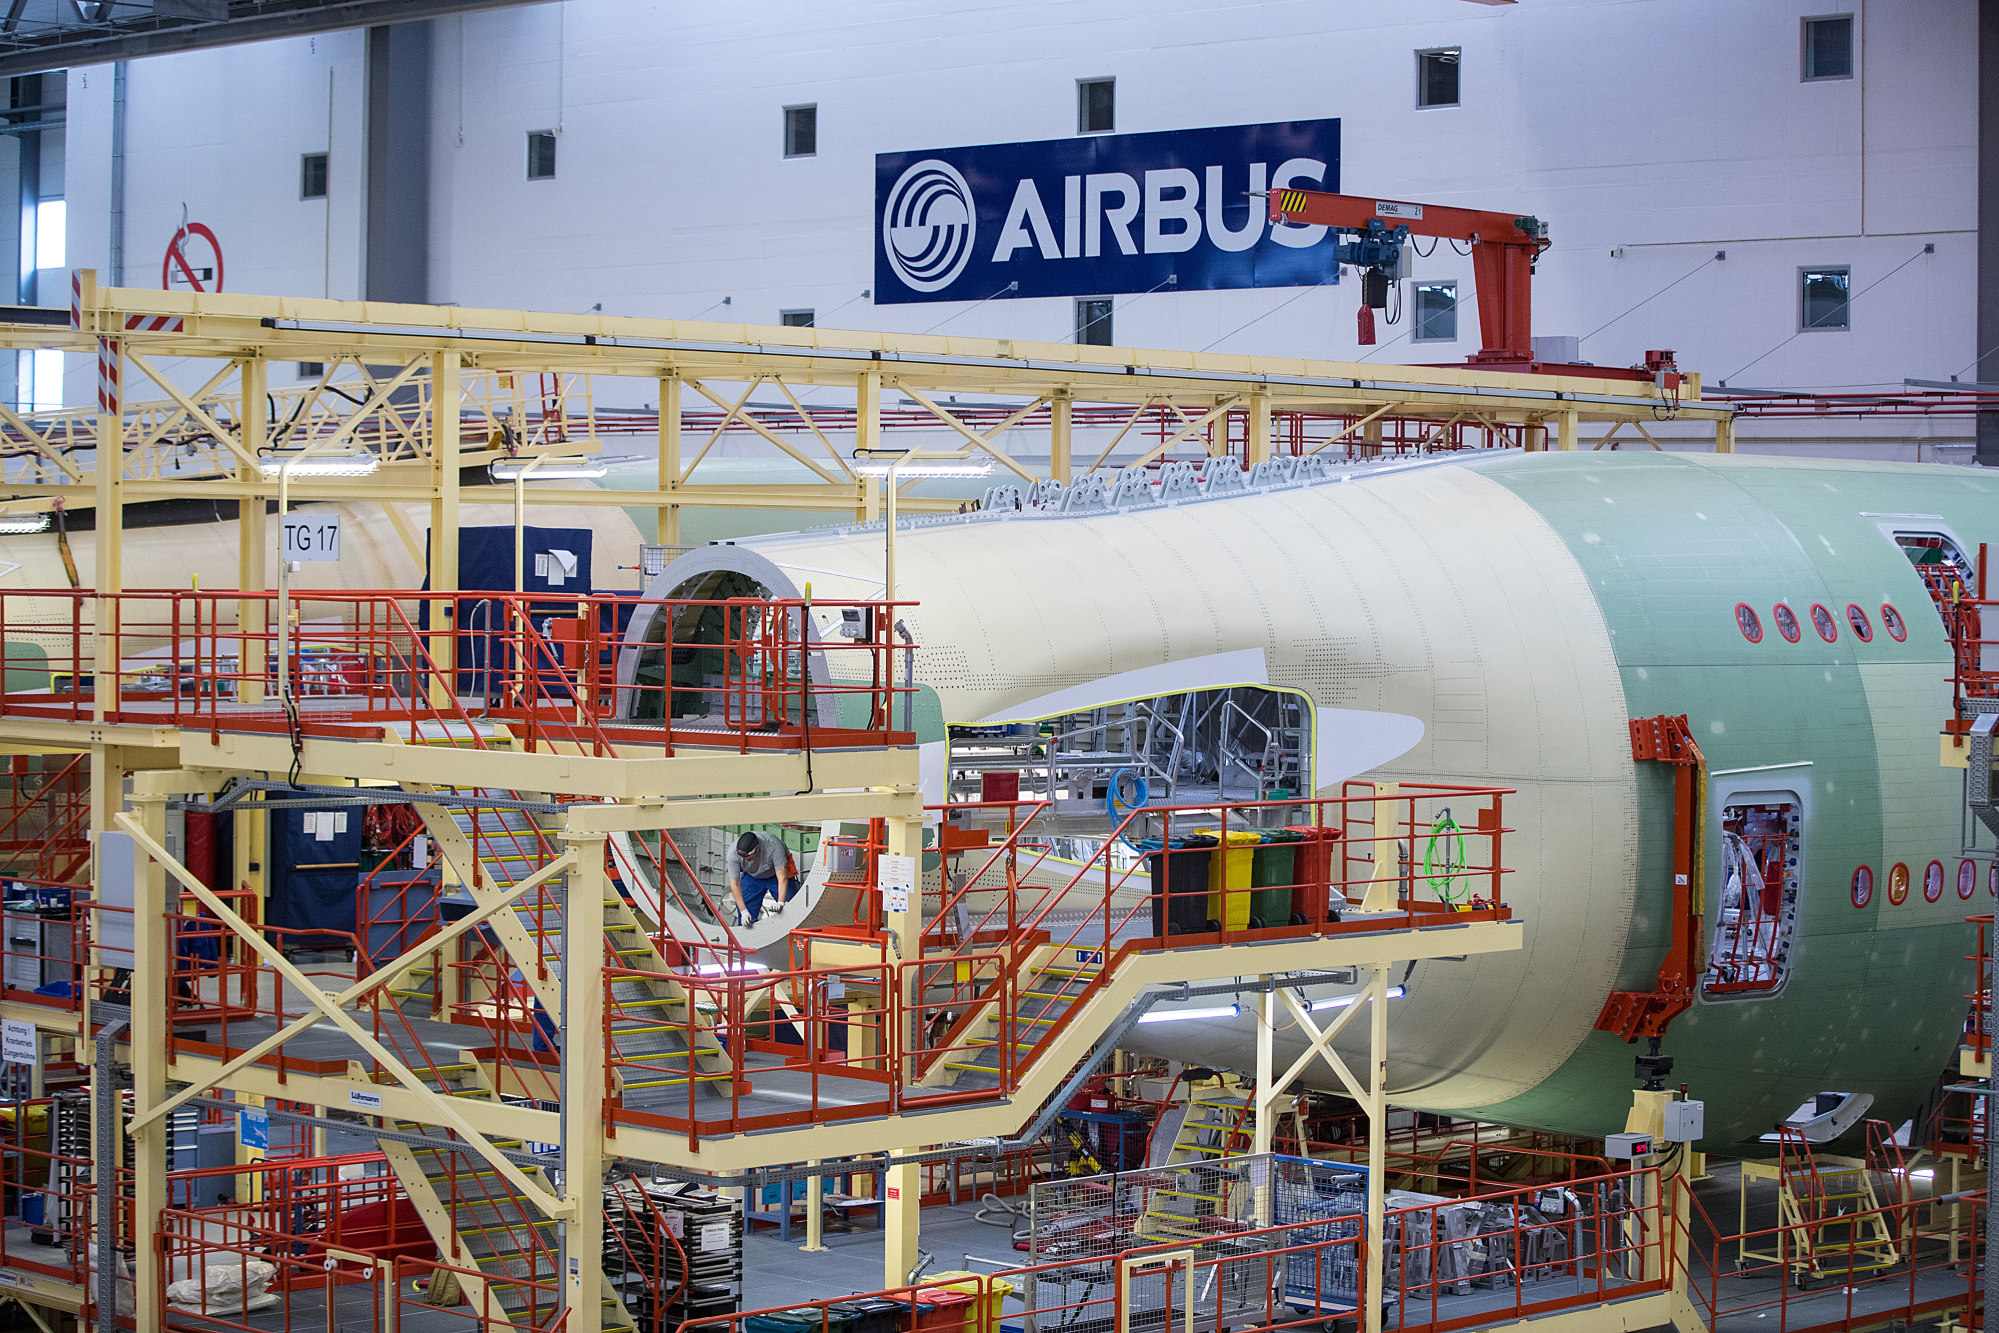 An employee works inside the fuselage tail cone of an Airbus A380 double-deck wide-body jet on the Airbus SE aircraft assembly line in Hamburg, Germany.